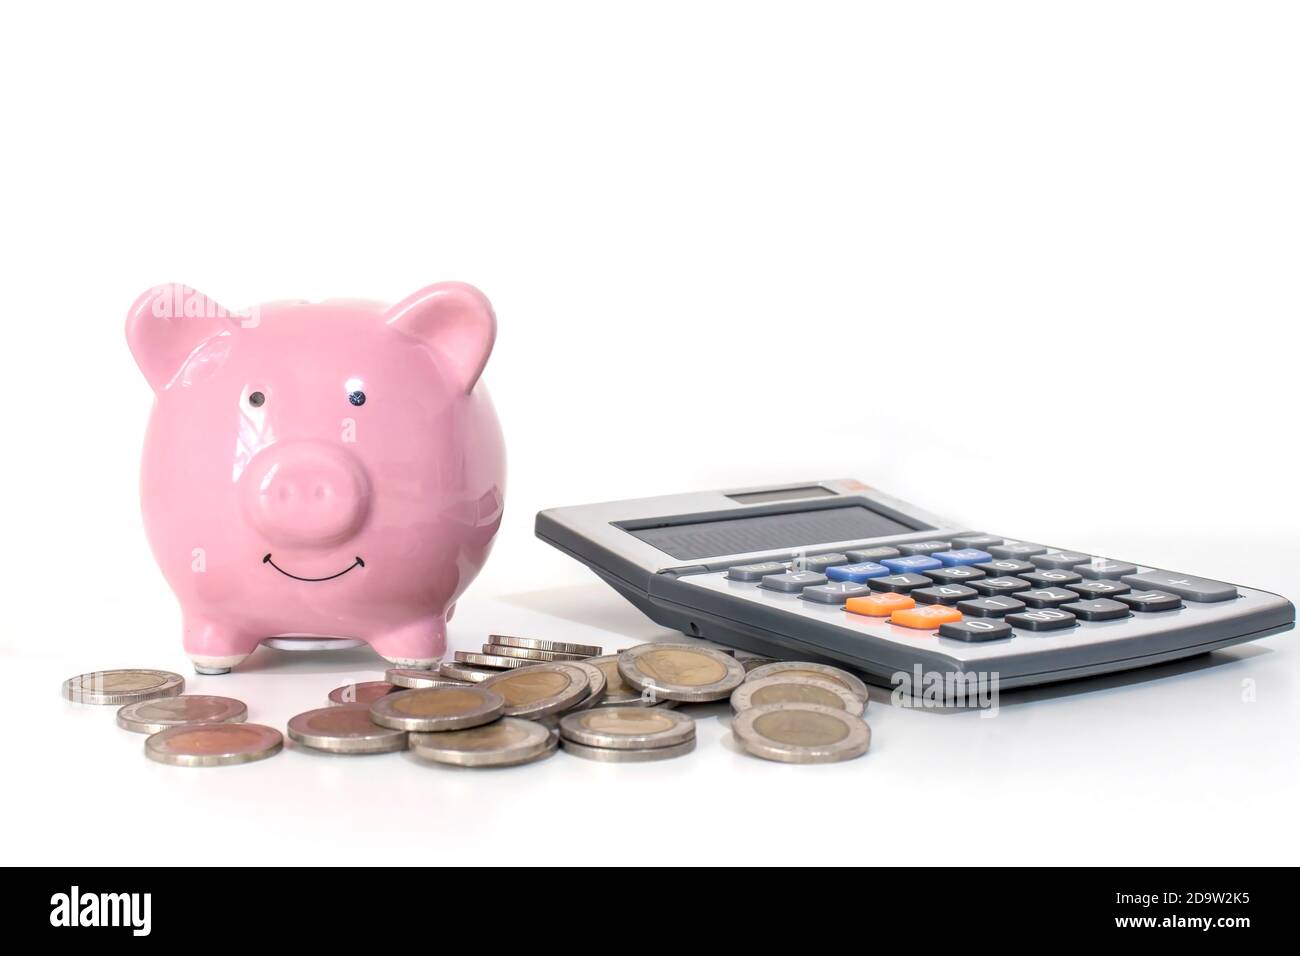 Pink piggy bank including money and calculator on white background, finance, and money-saving concept. Stock Photo